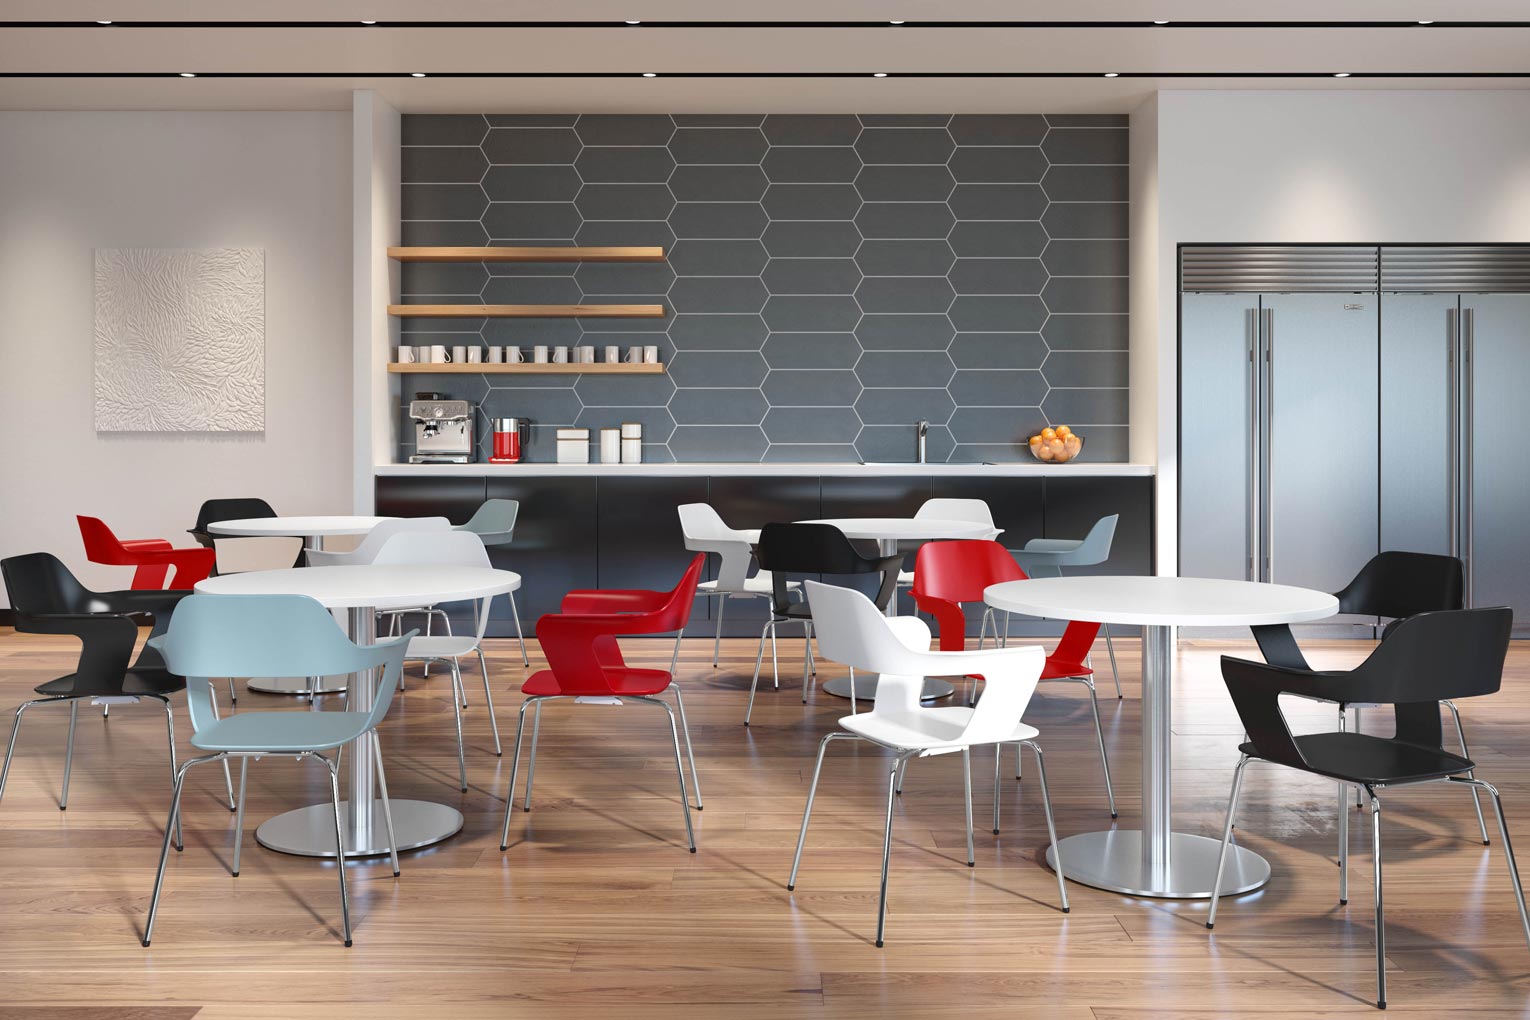 Break room with gray, red, black, and white chairs